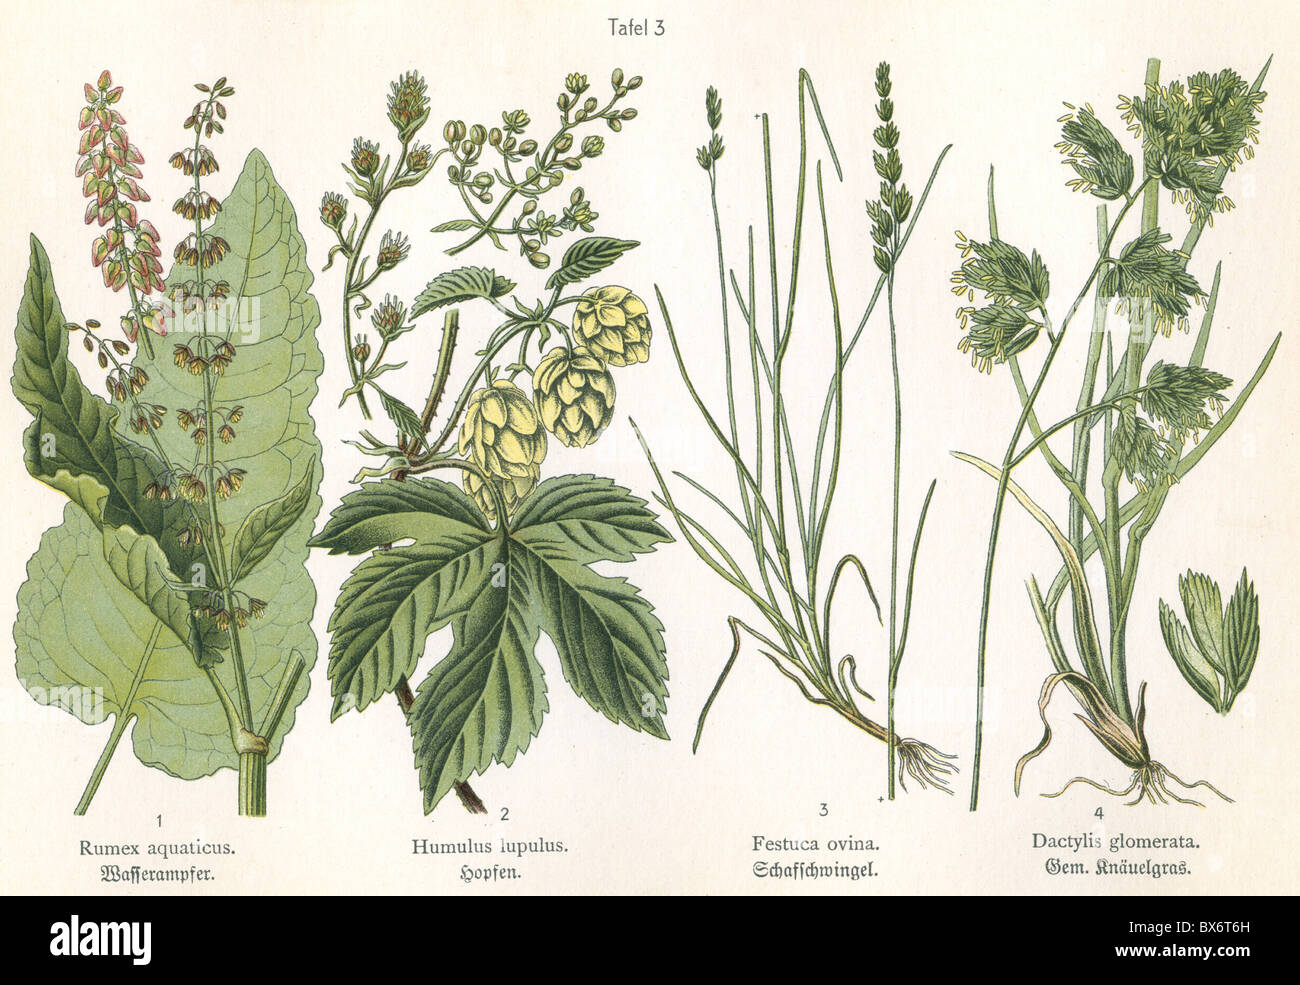 botany, four illustrations, Red dock (Rumex aquaticus), Common Hop (Humulus lupulus), sheep's fescue (Festuca ovina), Gramineae (Dactylis glomerata), circa 1914, Additional-Rights-Clearences-Not Available Stock Photo